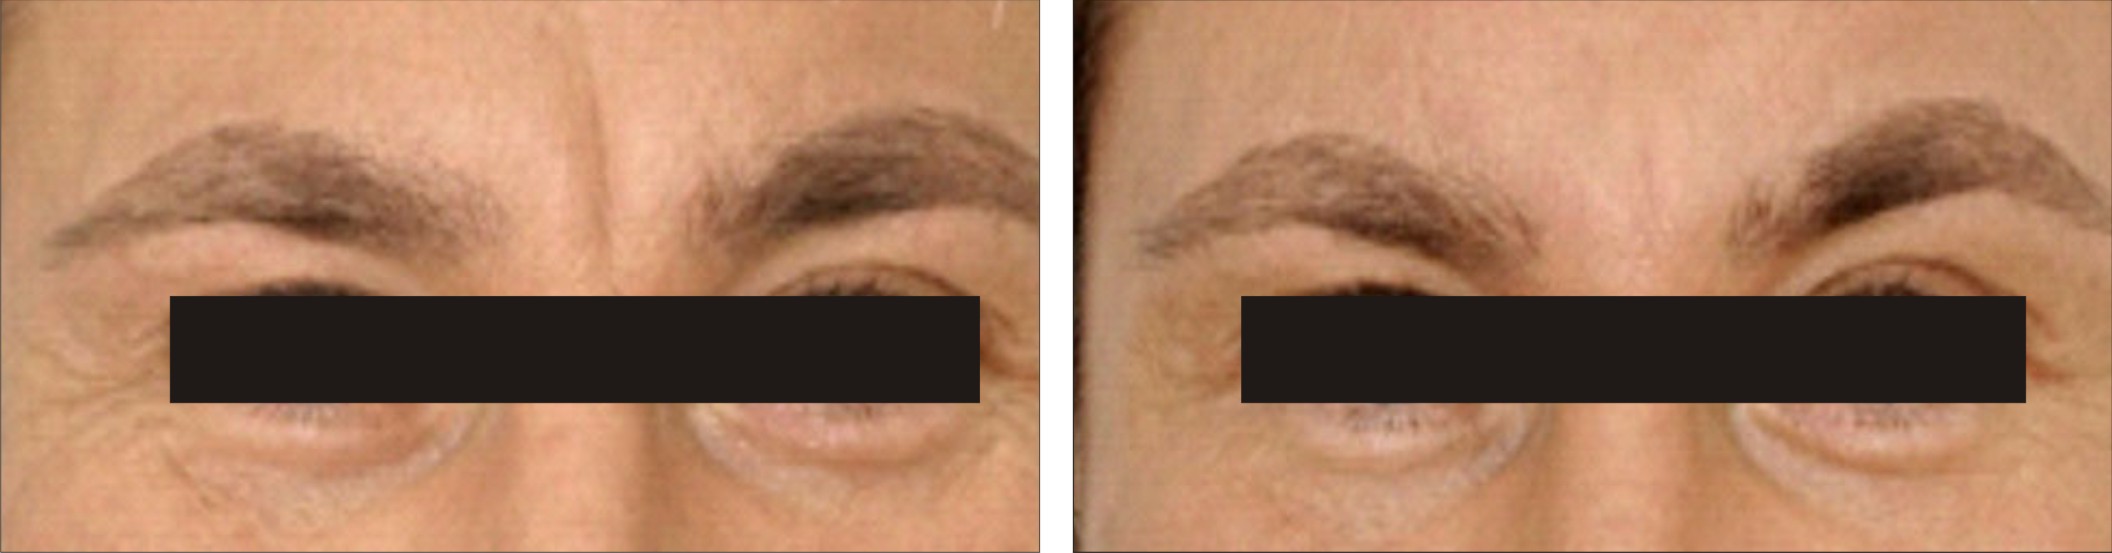 Anti Ageing Treatment Image One